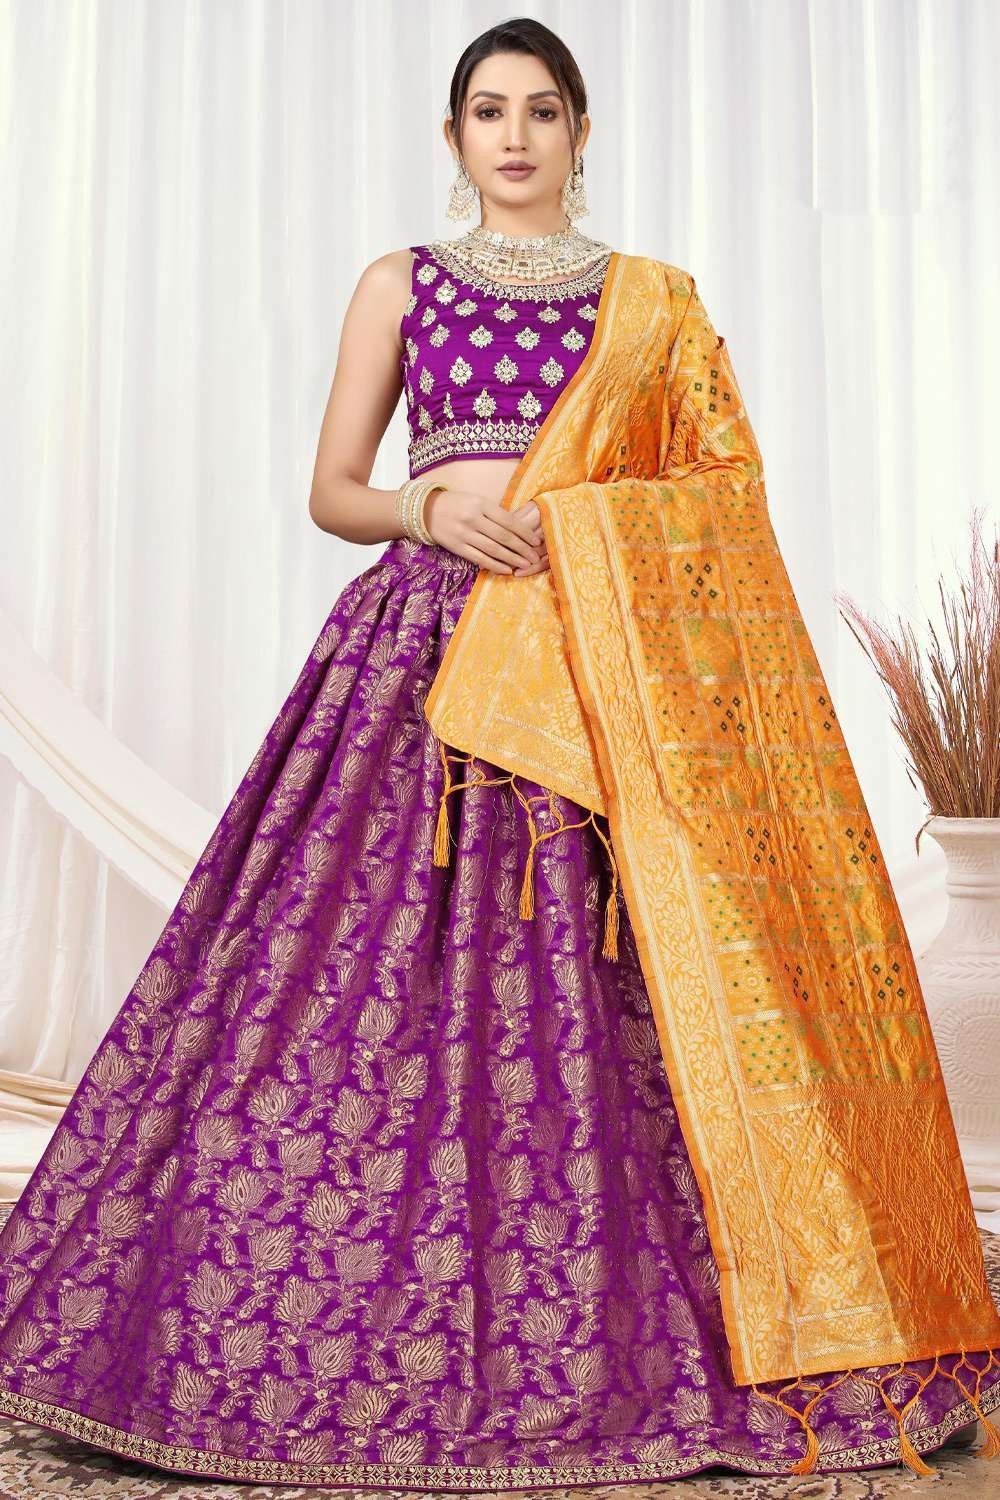 Spotted: Real Brides Who looked Gorgeous In Their Aubergine Lehengas |  WeddingBazaar